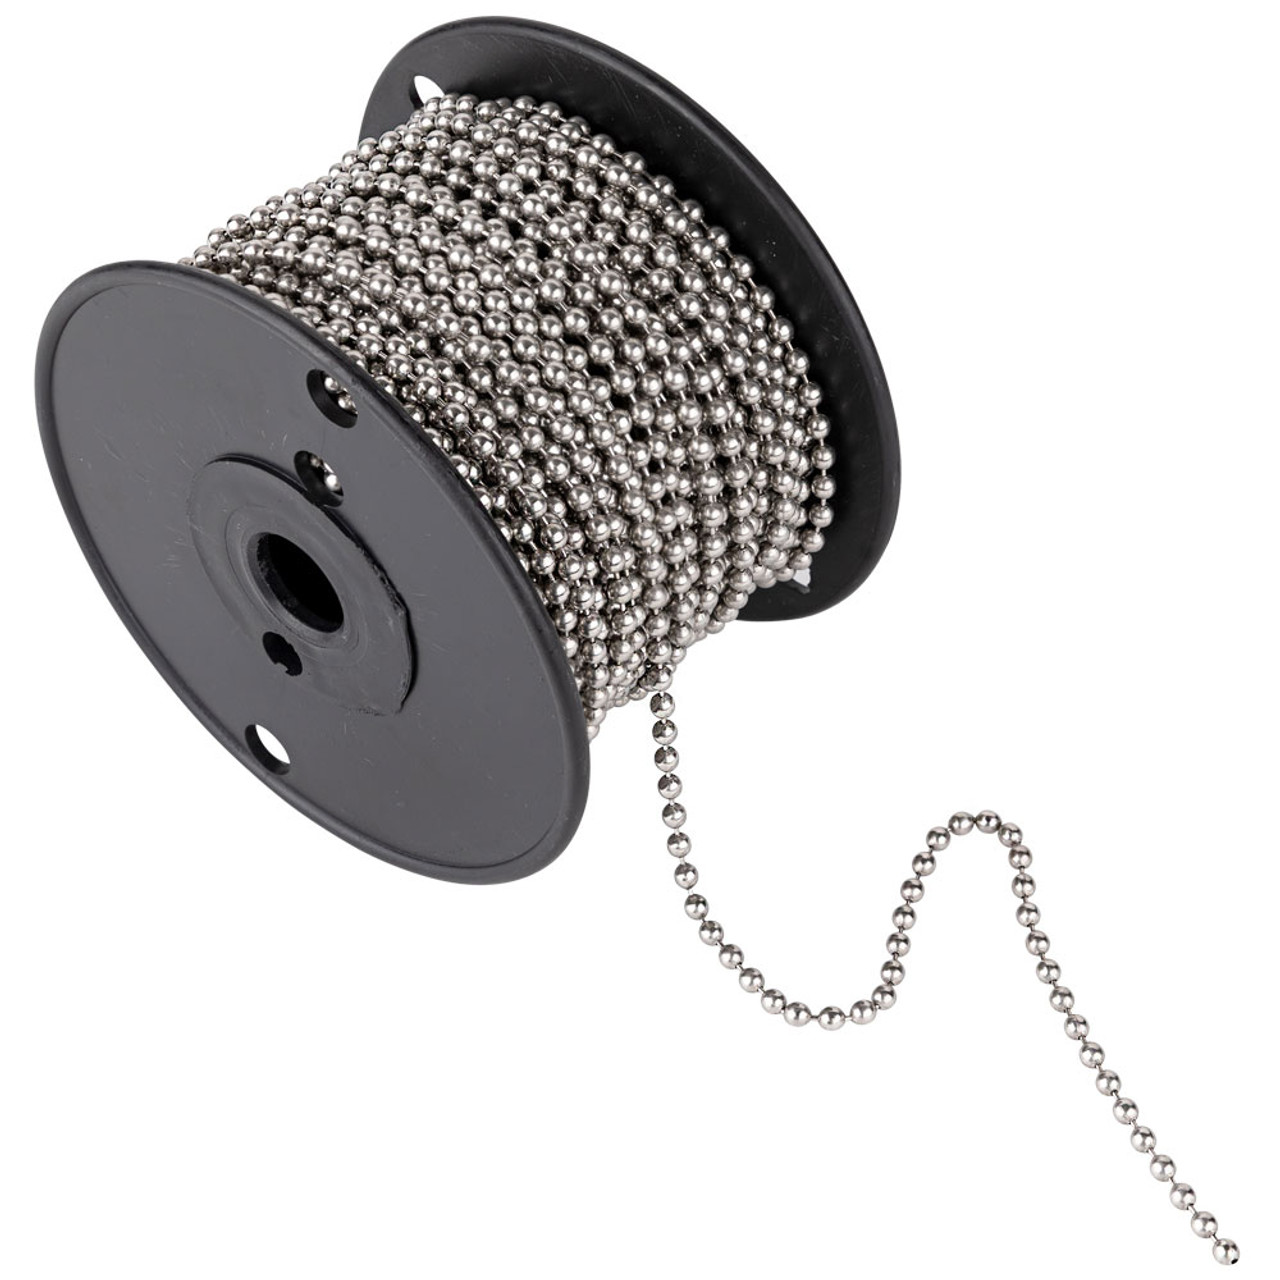 #10 stainless steel ball chain roll with chain hanging off of spool.